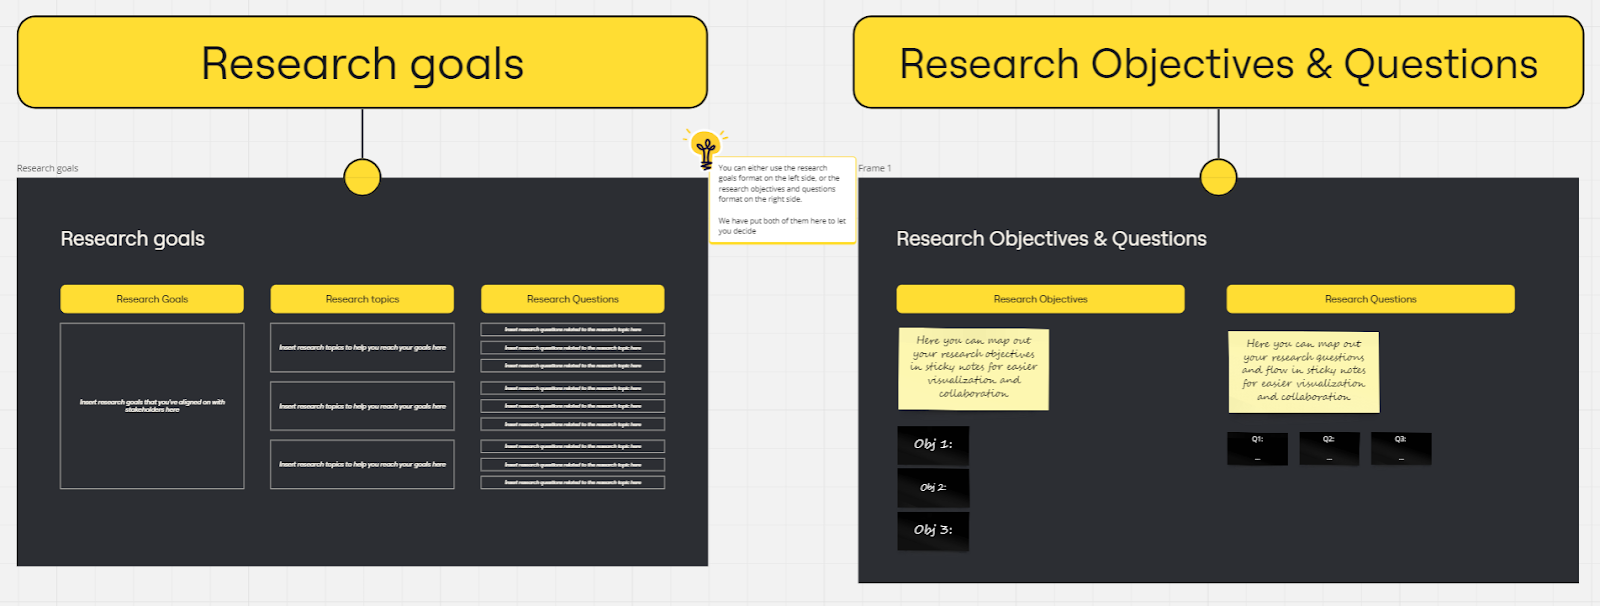 Screenshot of Miro template showing research goals and objectives.